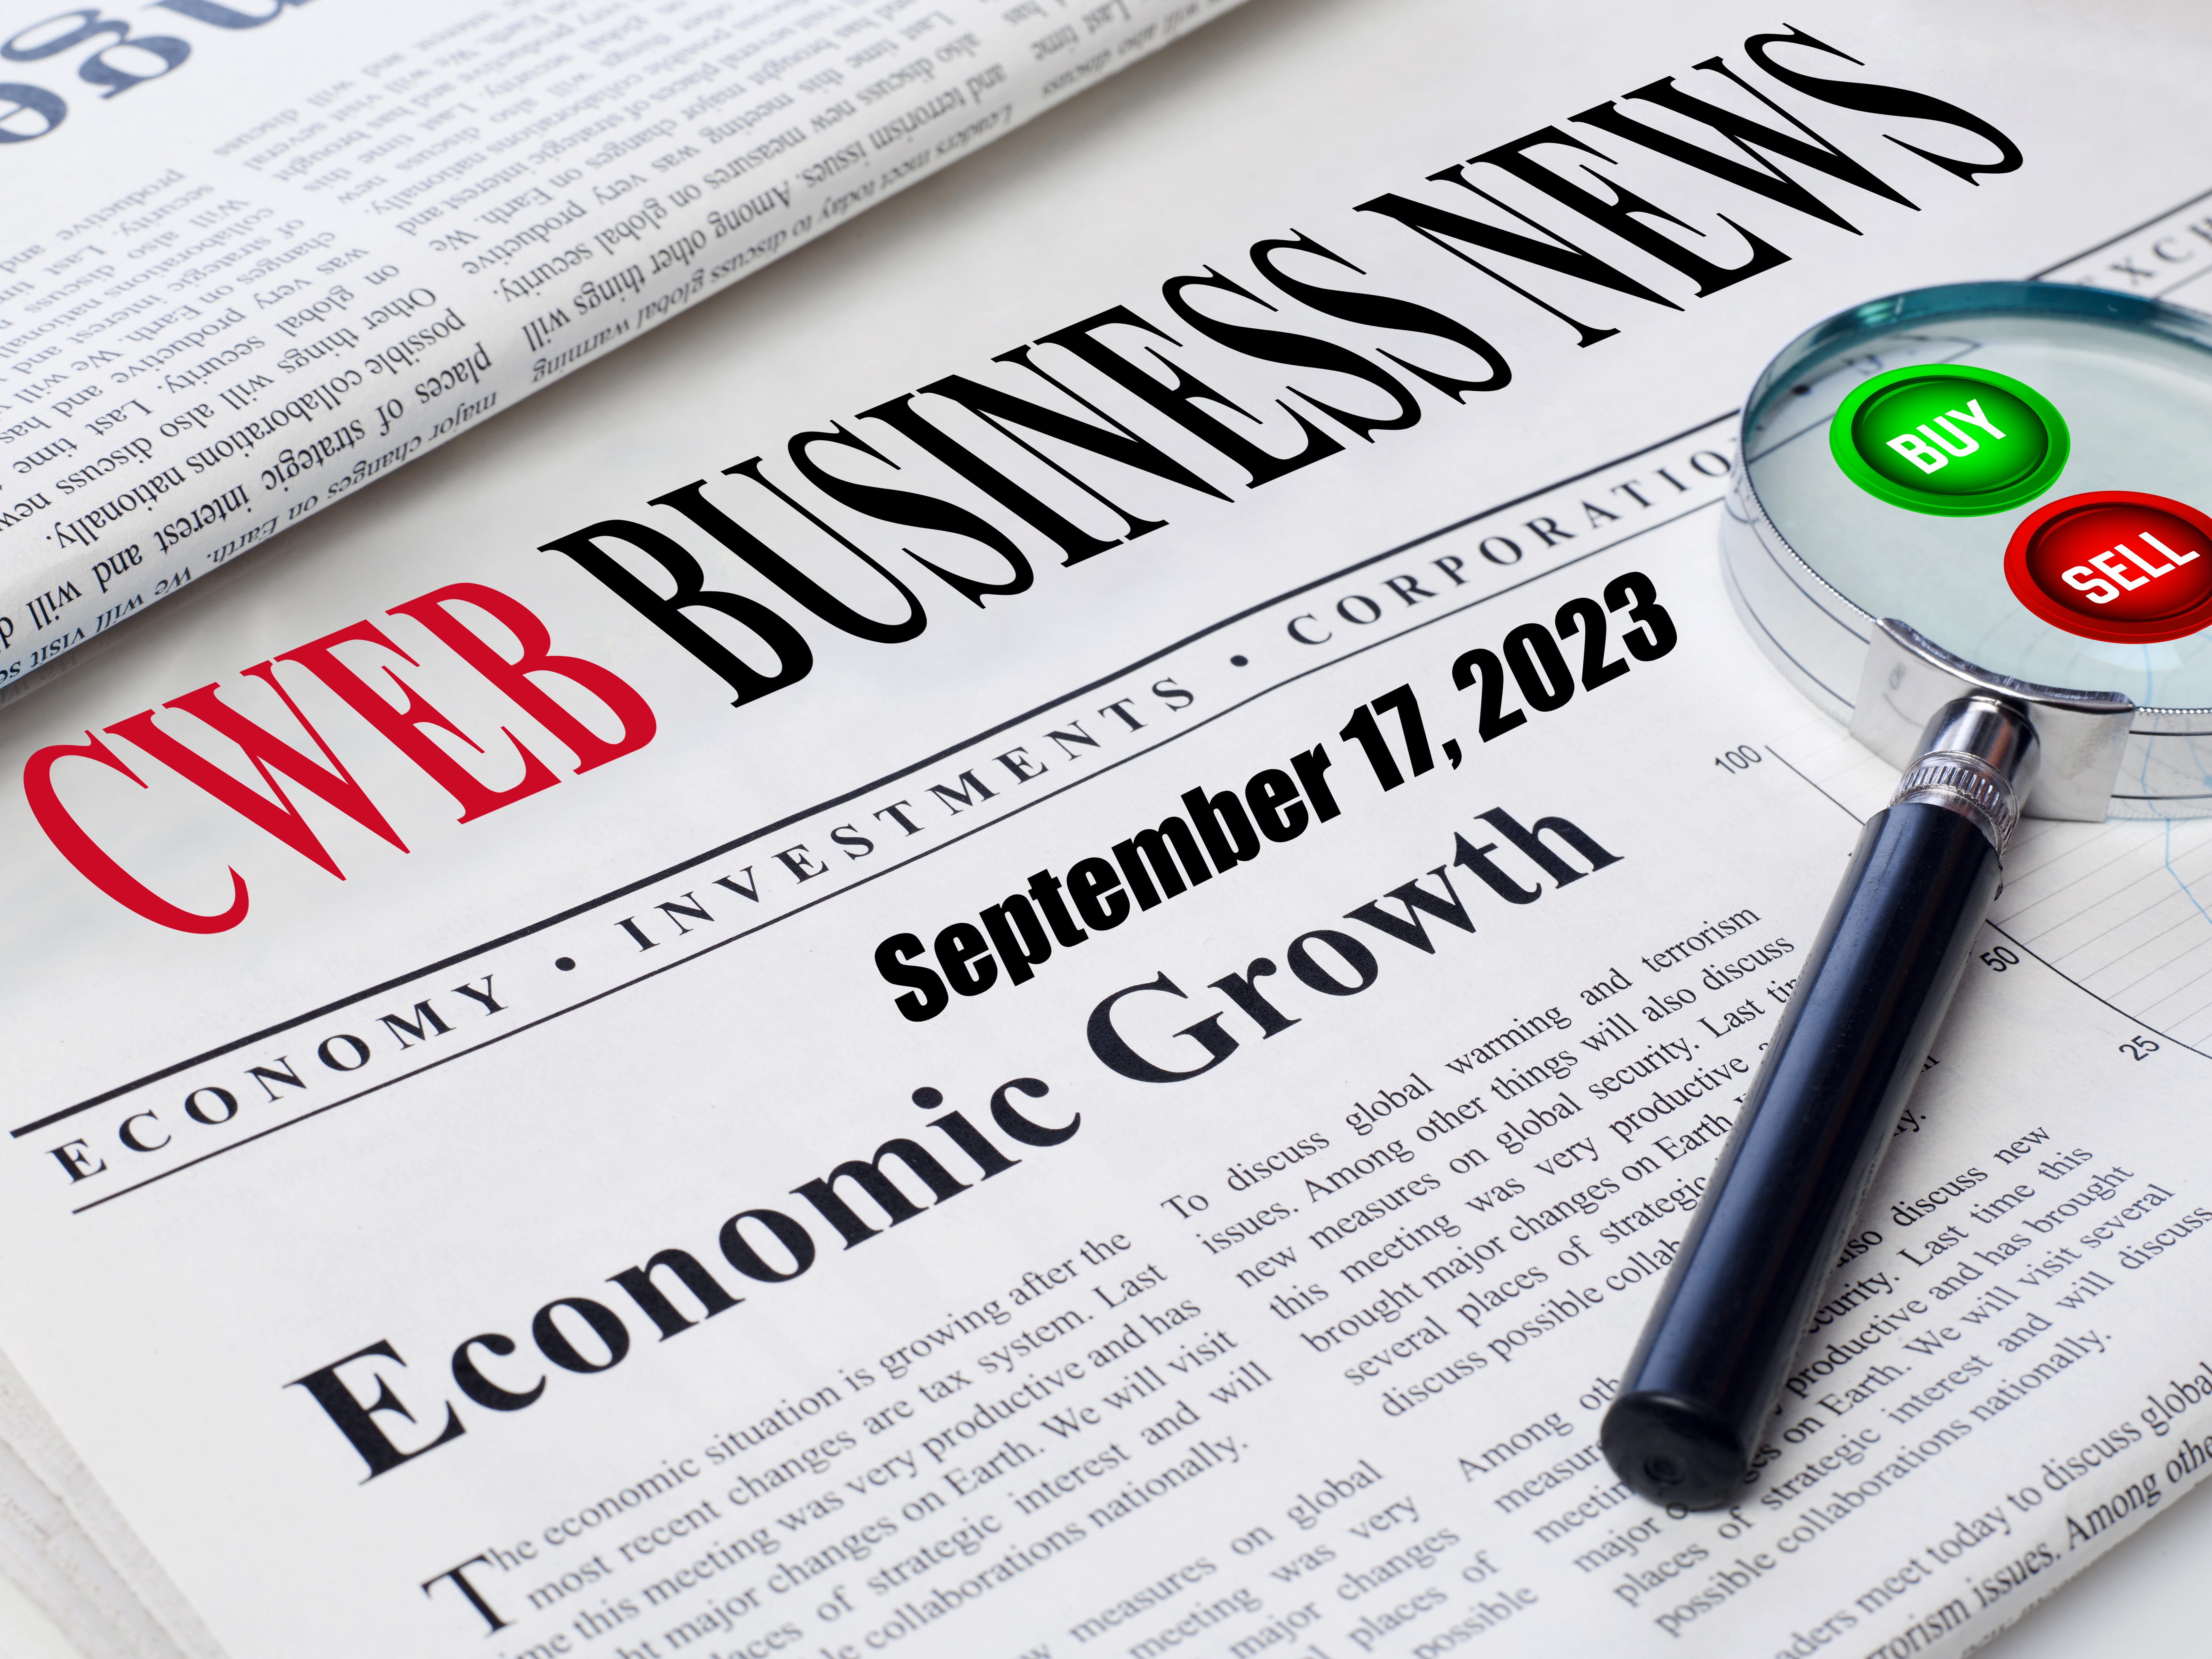 CWEB Publishes Roundup of Business and Trending News Highlights that Matter the Most - October 17, 2023